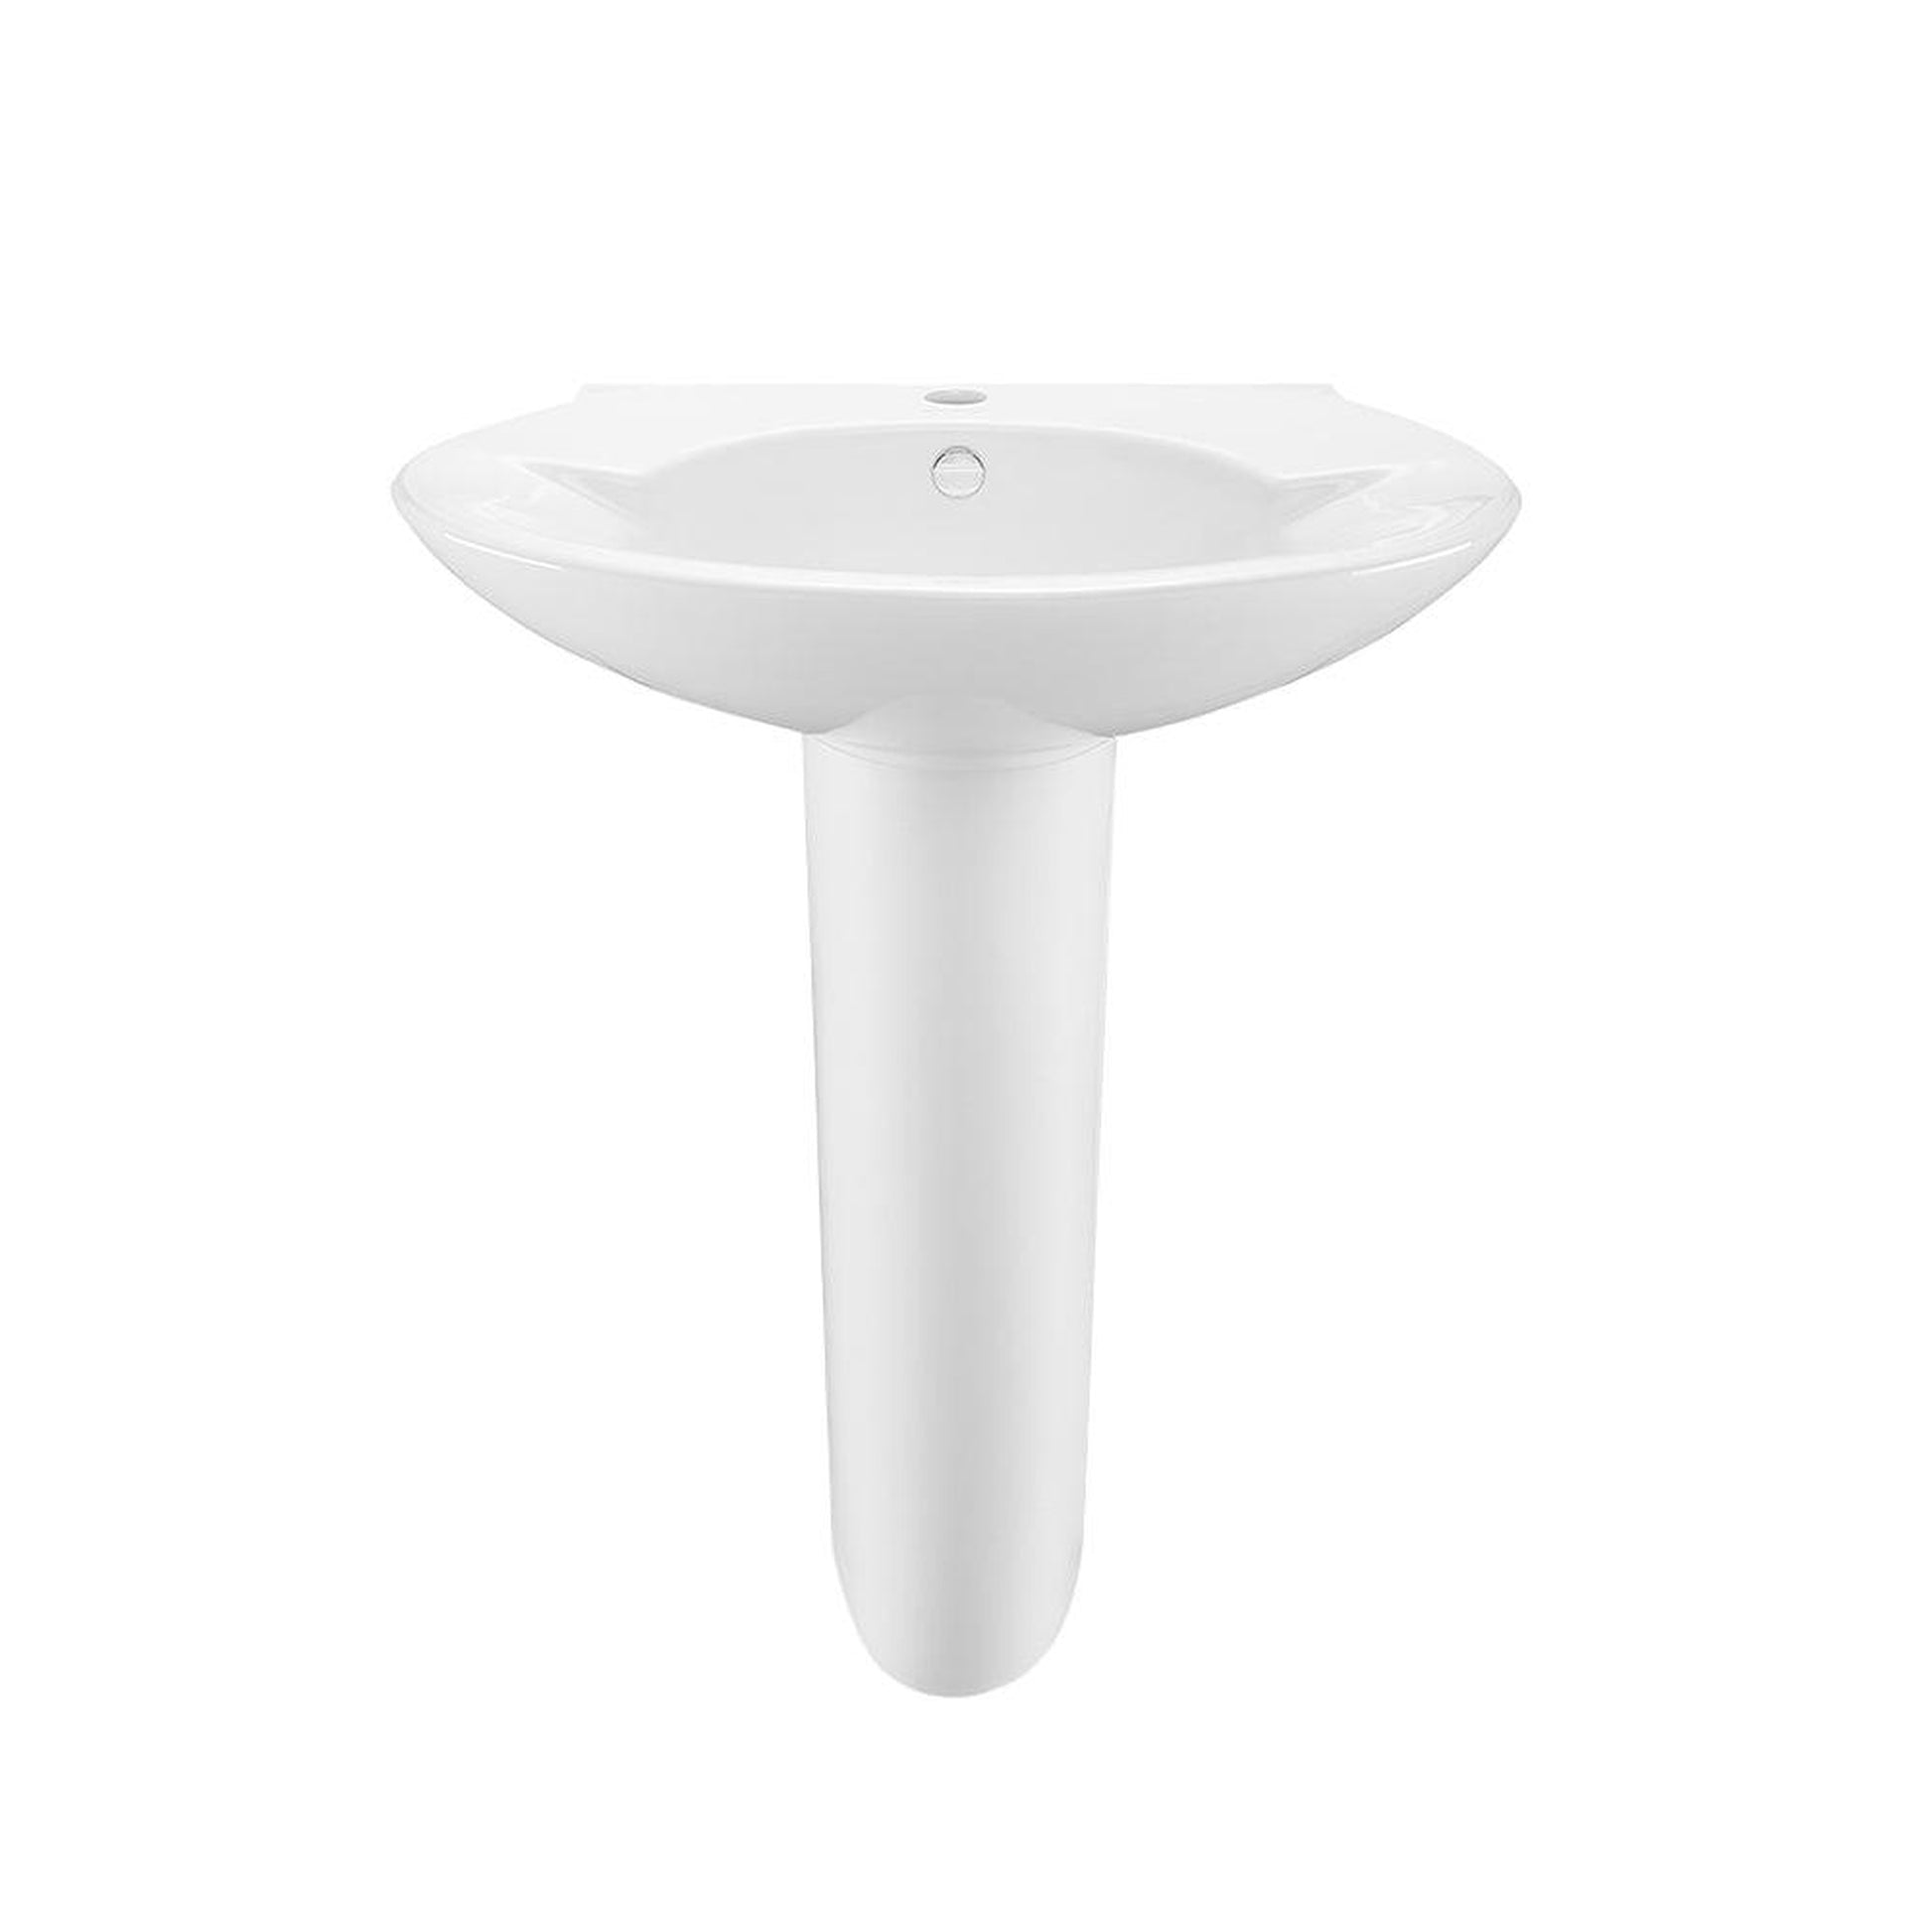 Swiss Madison Plaisir 28" x 33" Freestanding Two-Piece Rounded White Pedestal Sink With Overflow